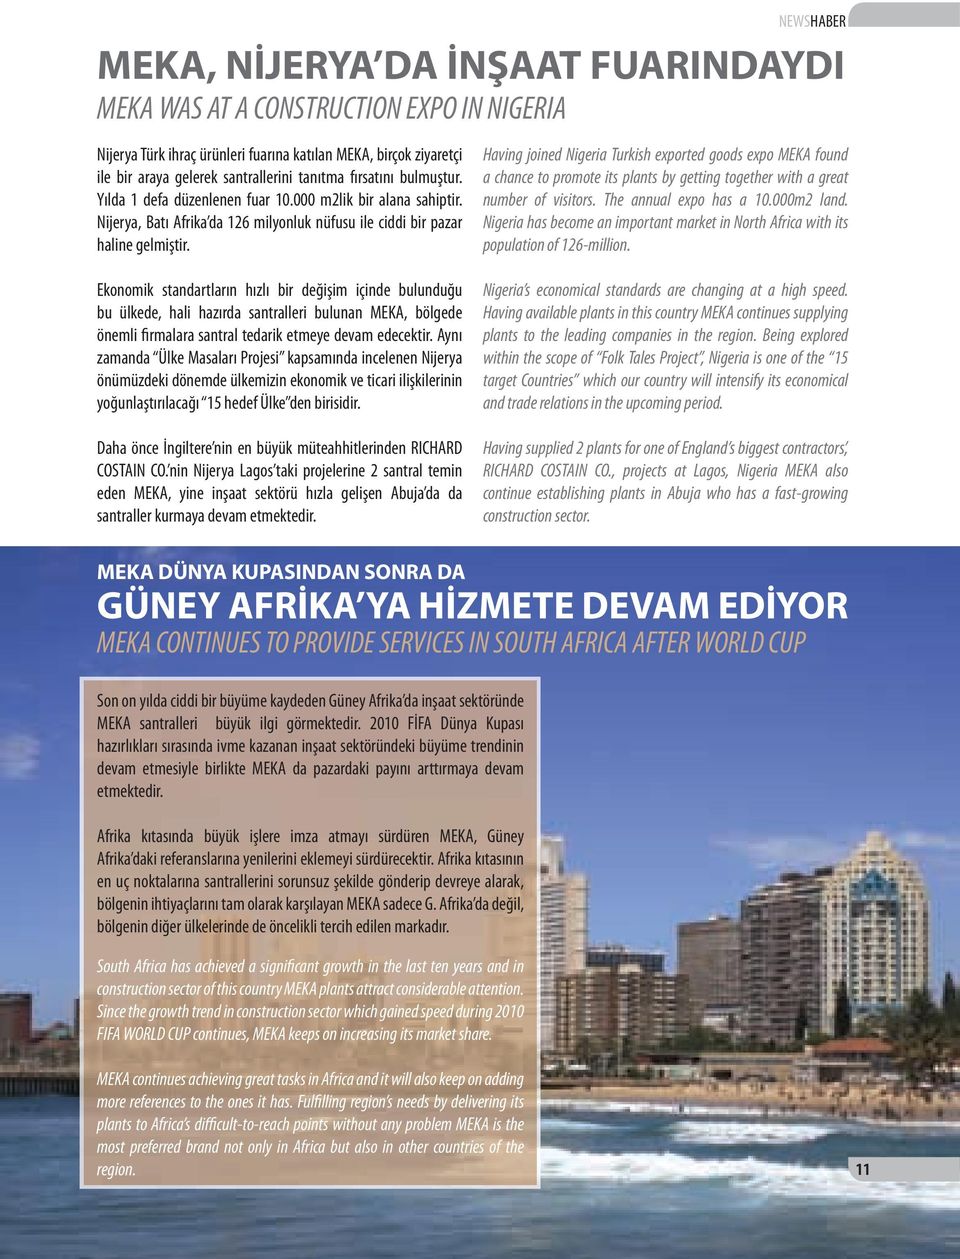 NEWSHABER MEKA, NİJERYA DA İNŞAAT FUARINDAYDI MEKA WAS AT A CONSTRUCTION EXPO IN NIGERIA Having joined Nigeria Turkish exported goods expo MEKA found a chance to promote its plants by getting